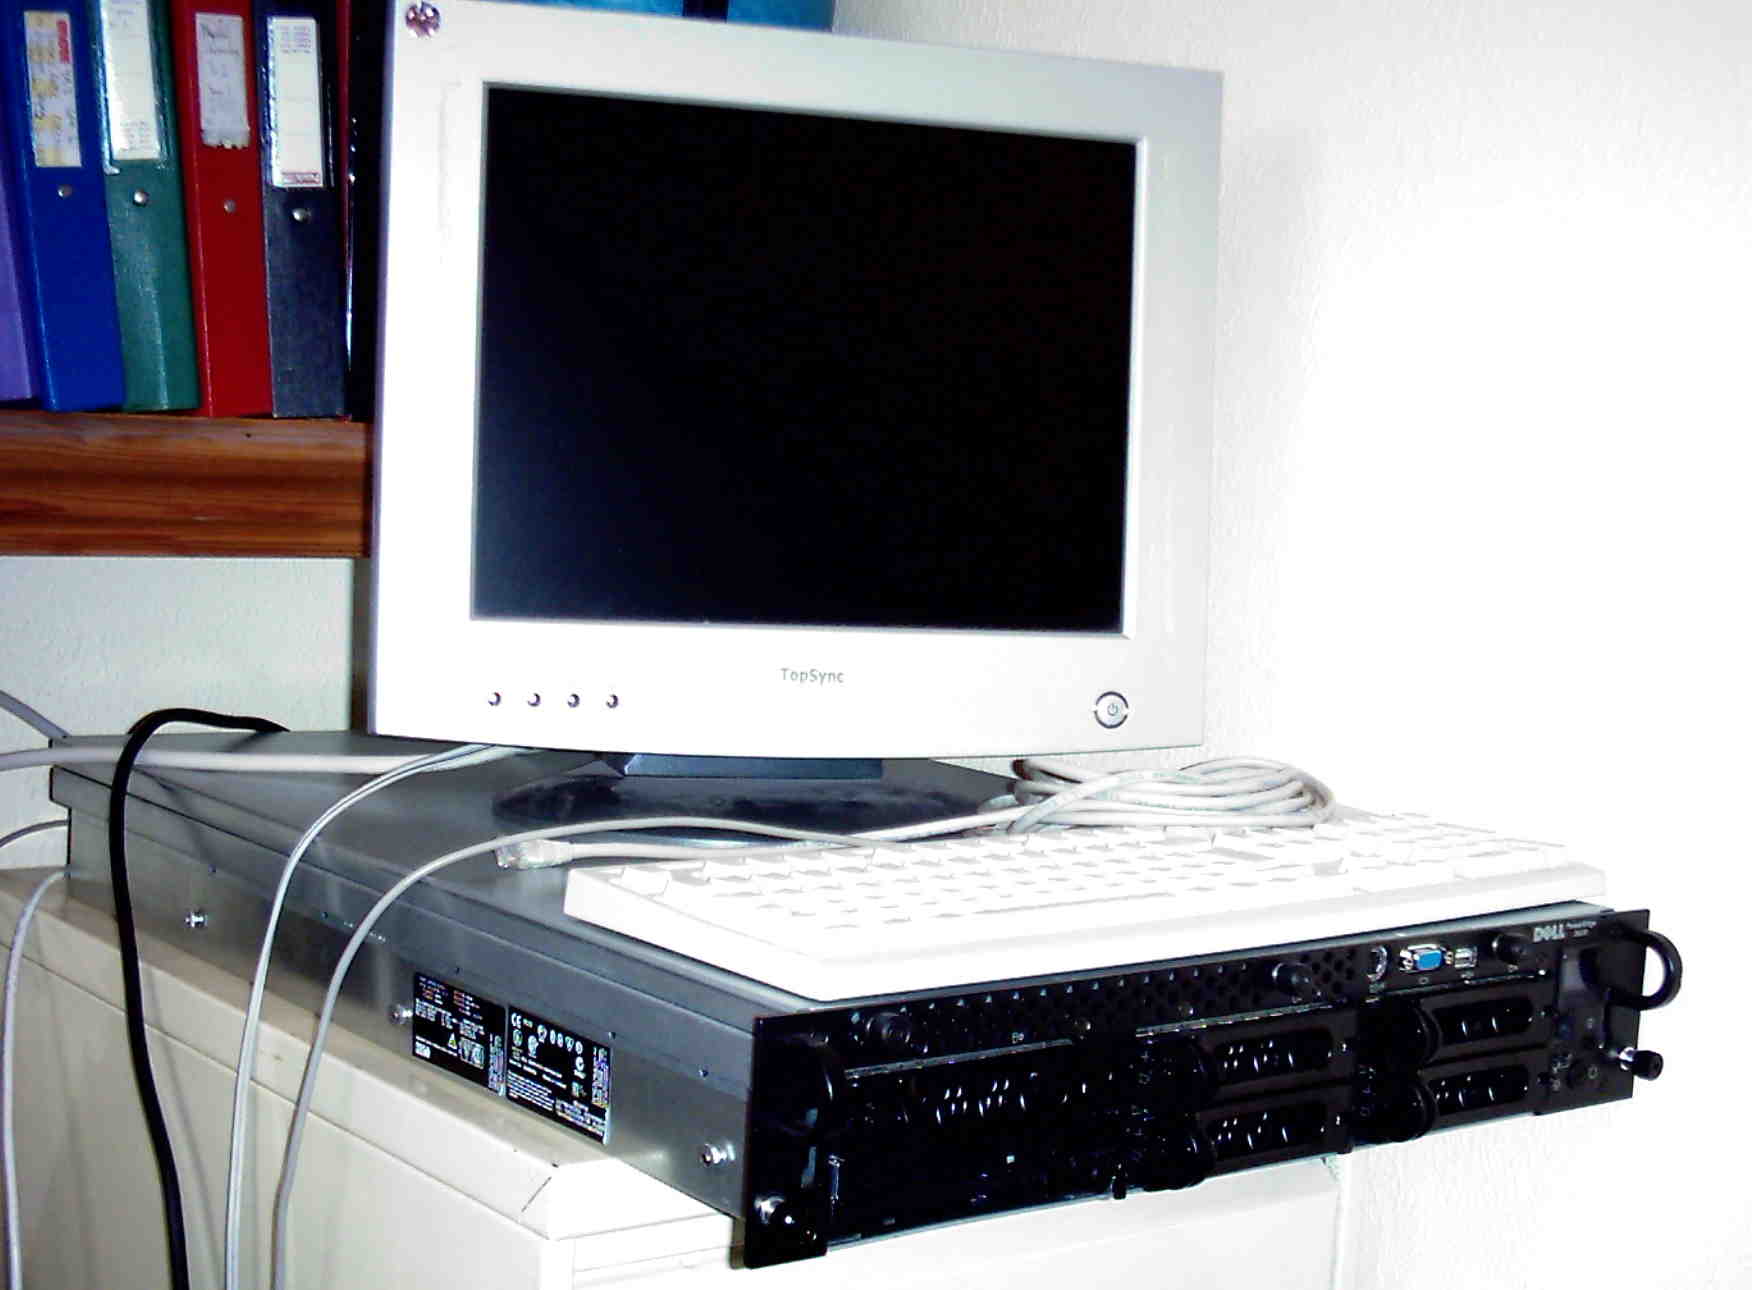 Picture of my Poweredge 2650 server, its a big lump of metal about 3ft by 2ft weighing over 70lbs